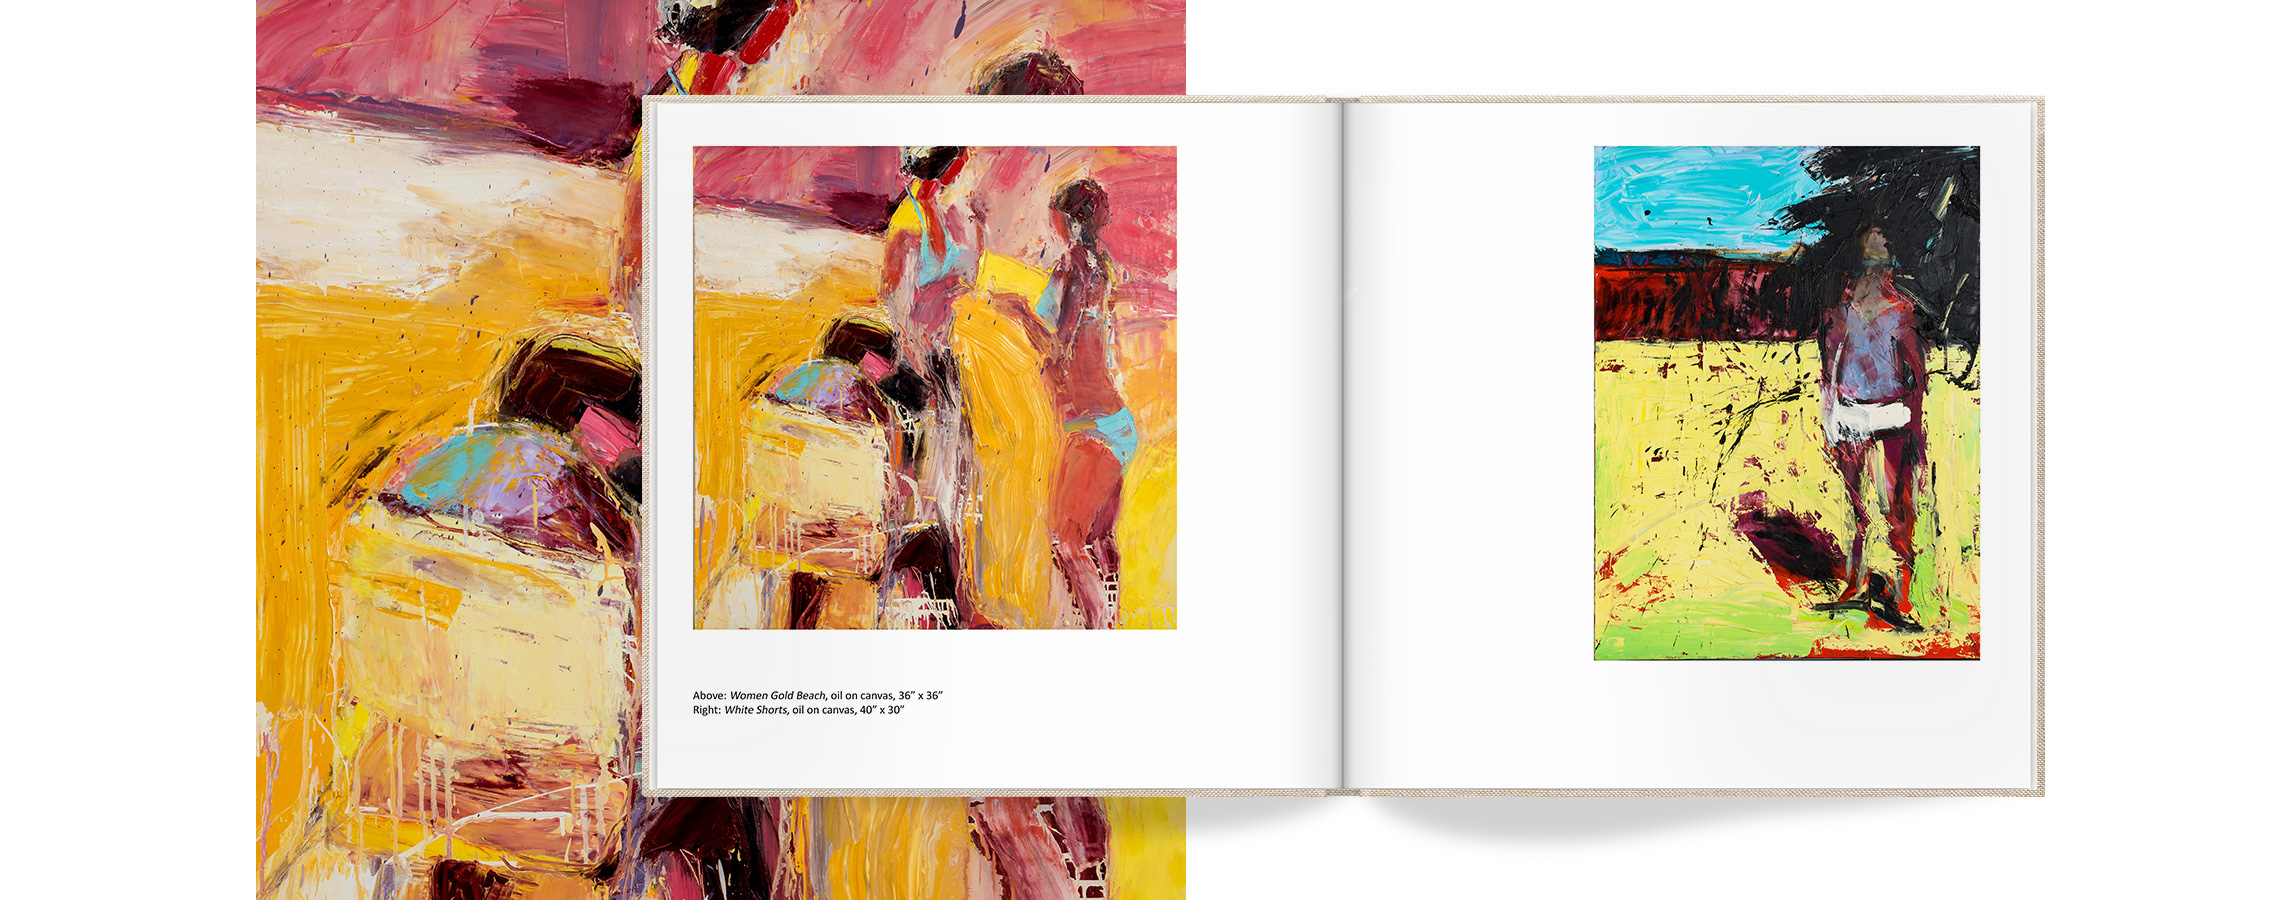 Photo book with art images.